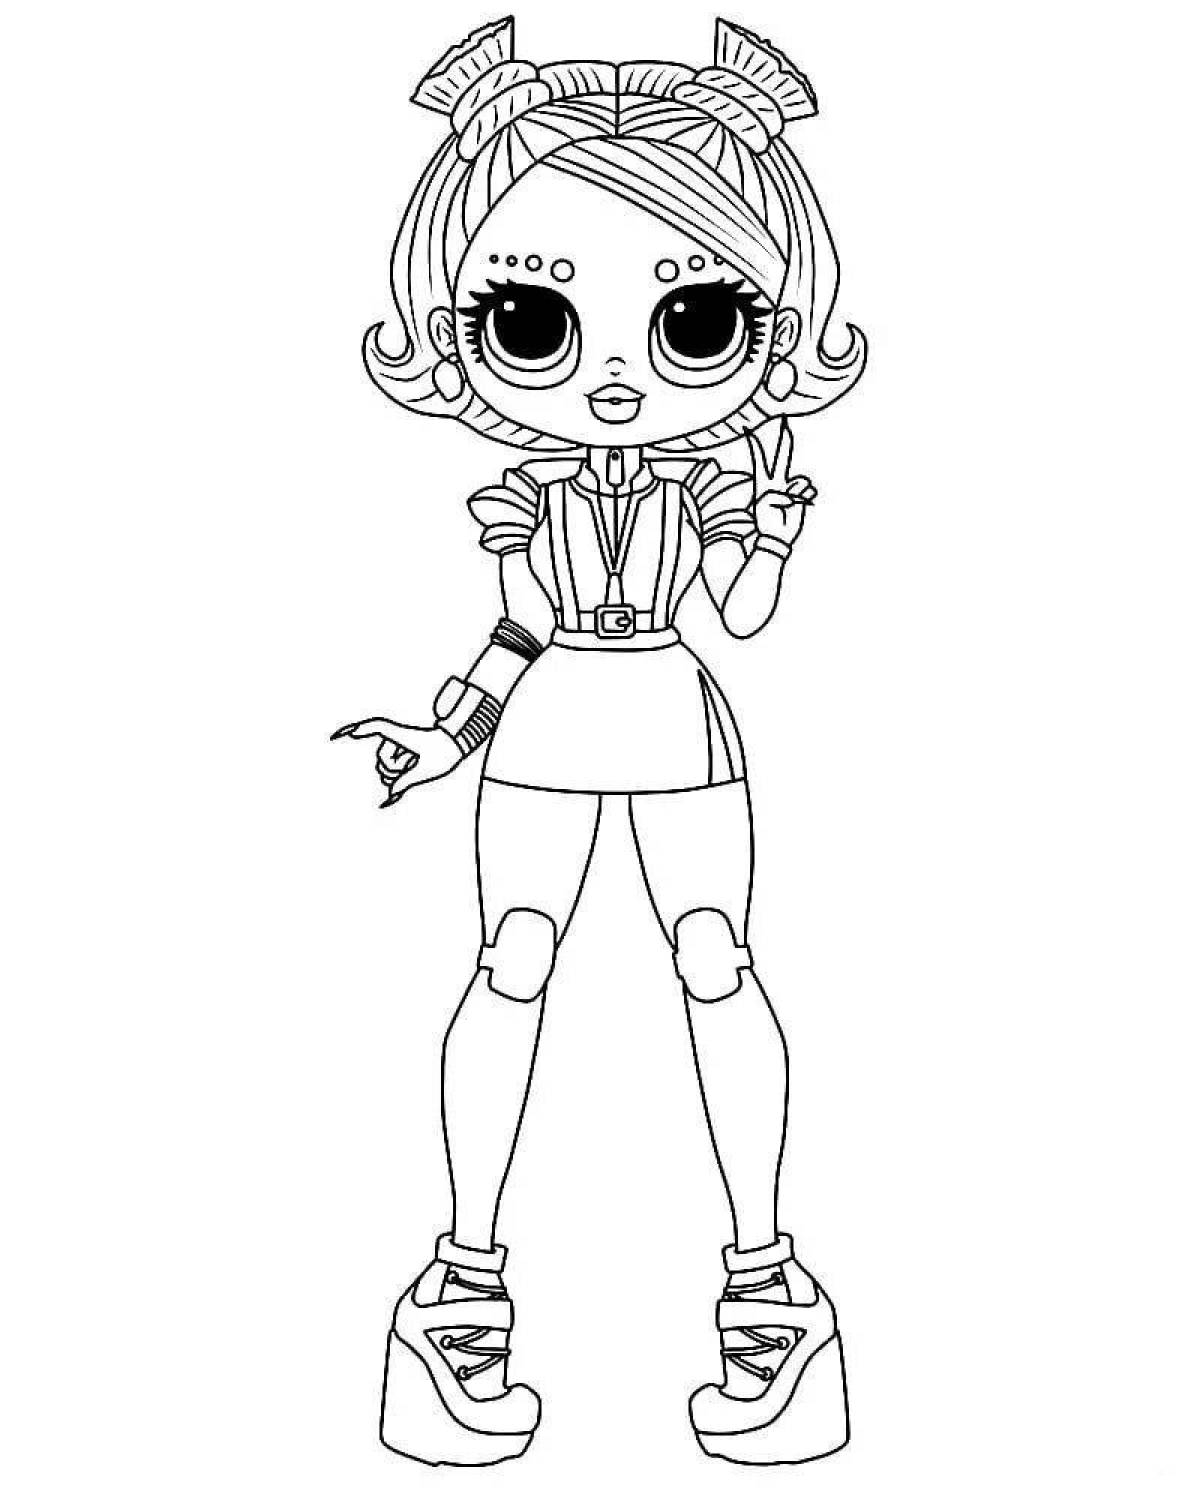 Live coloring lol adult doll